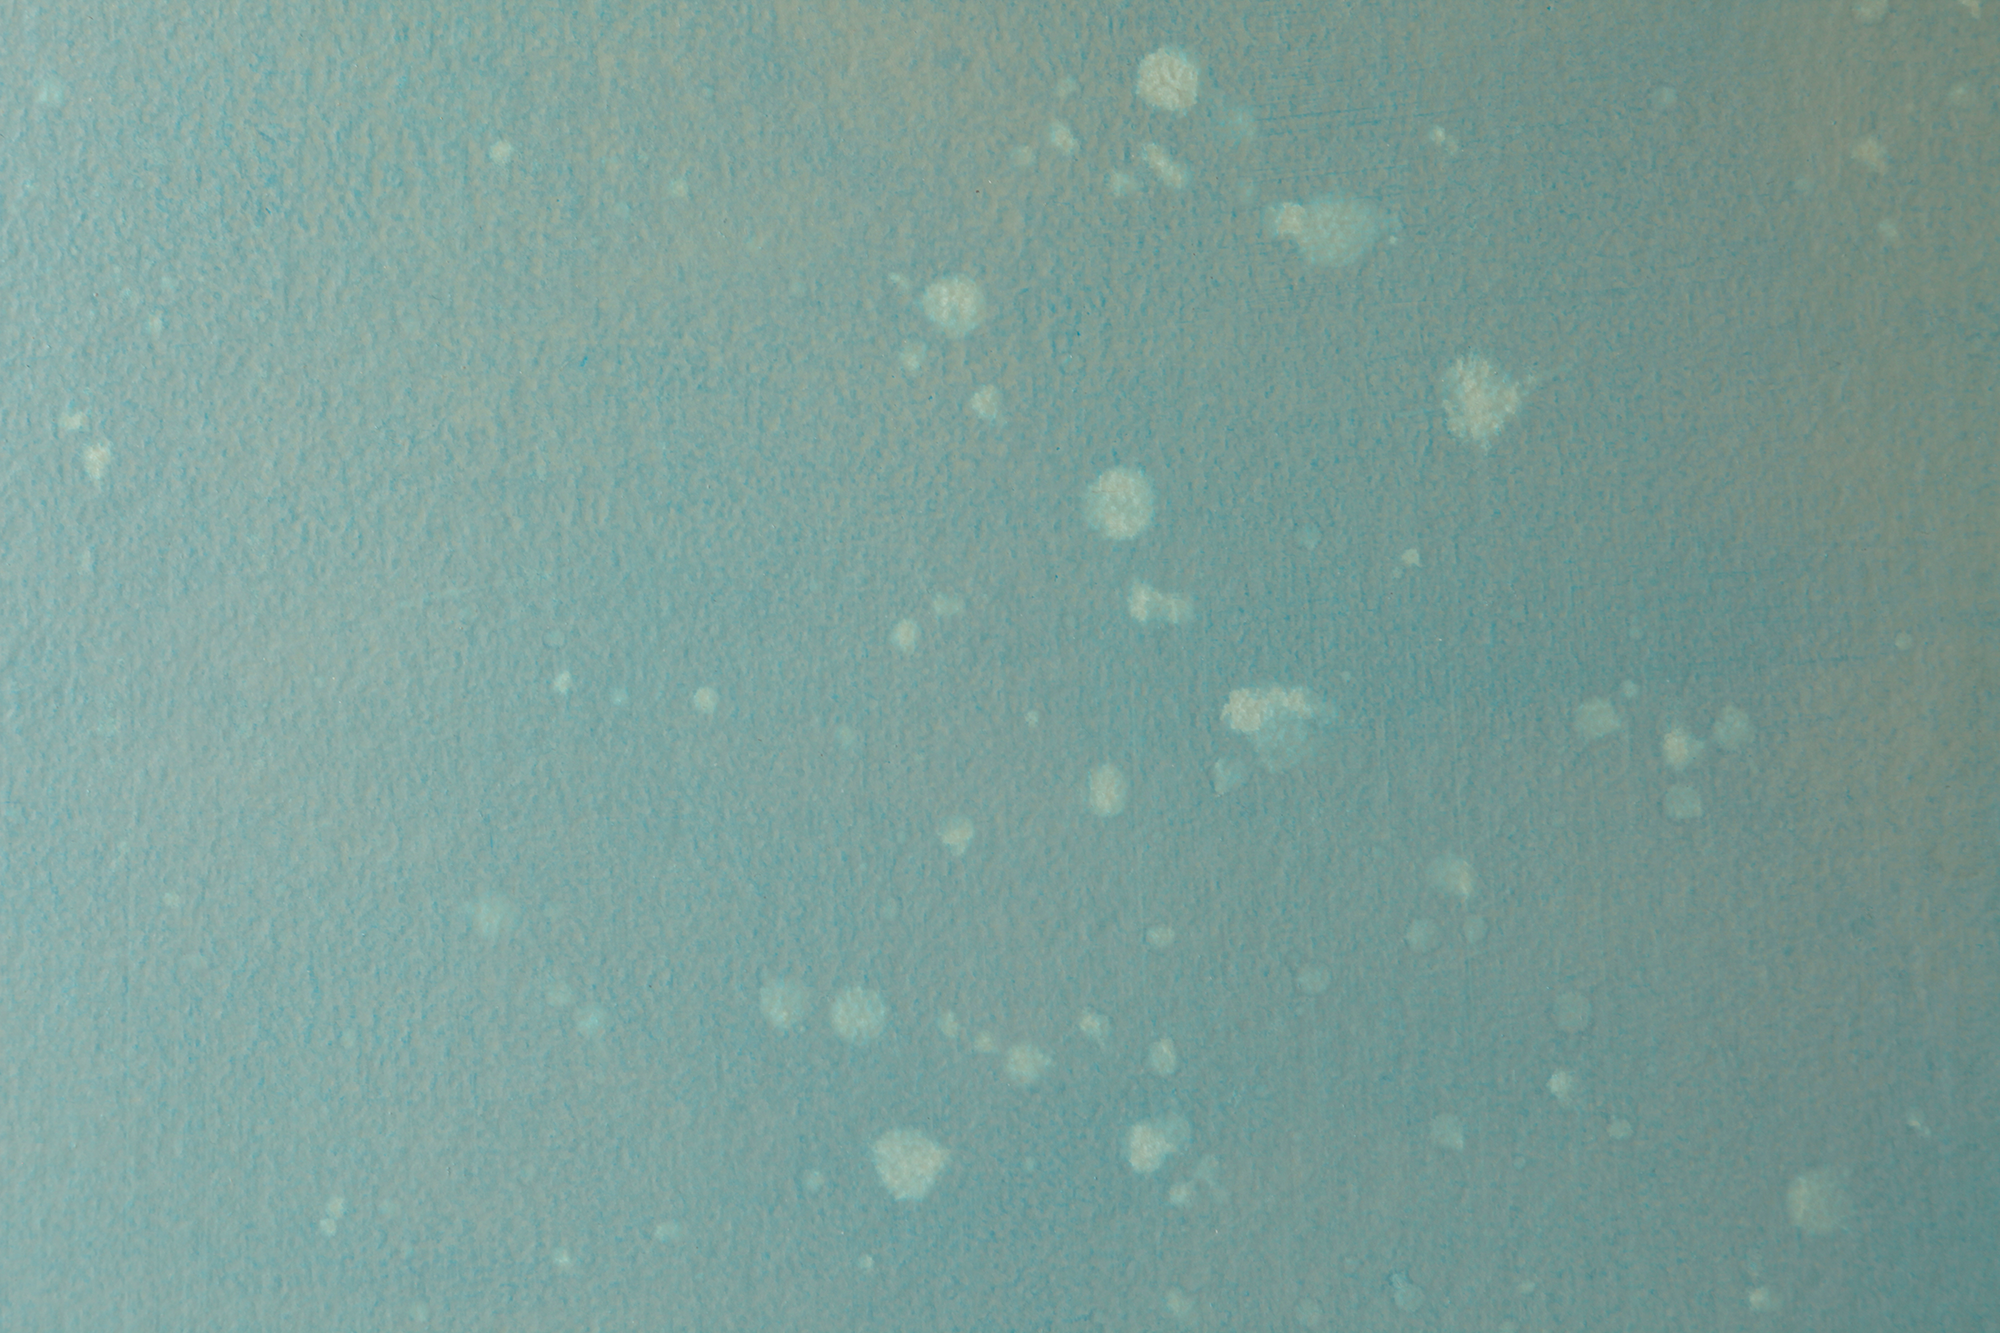 Detail of a wallpaper in a blurred paint splatter pattern in light blue on a turquoise field.